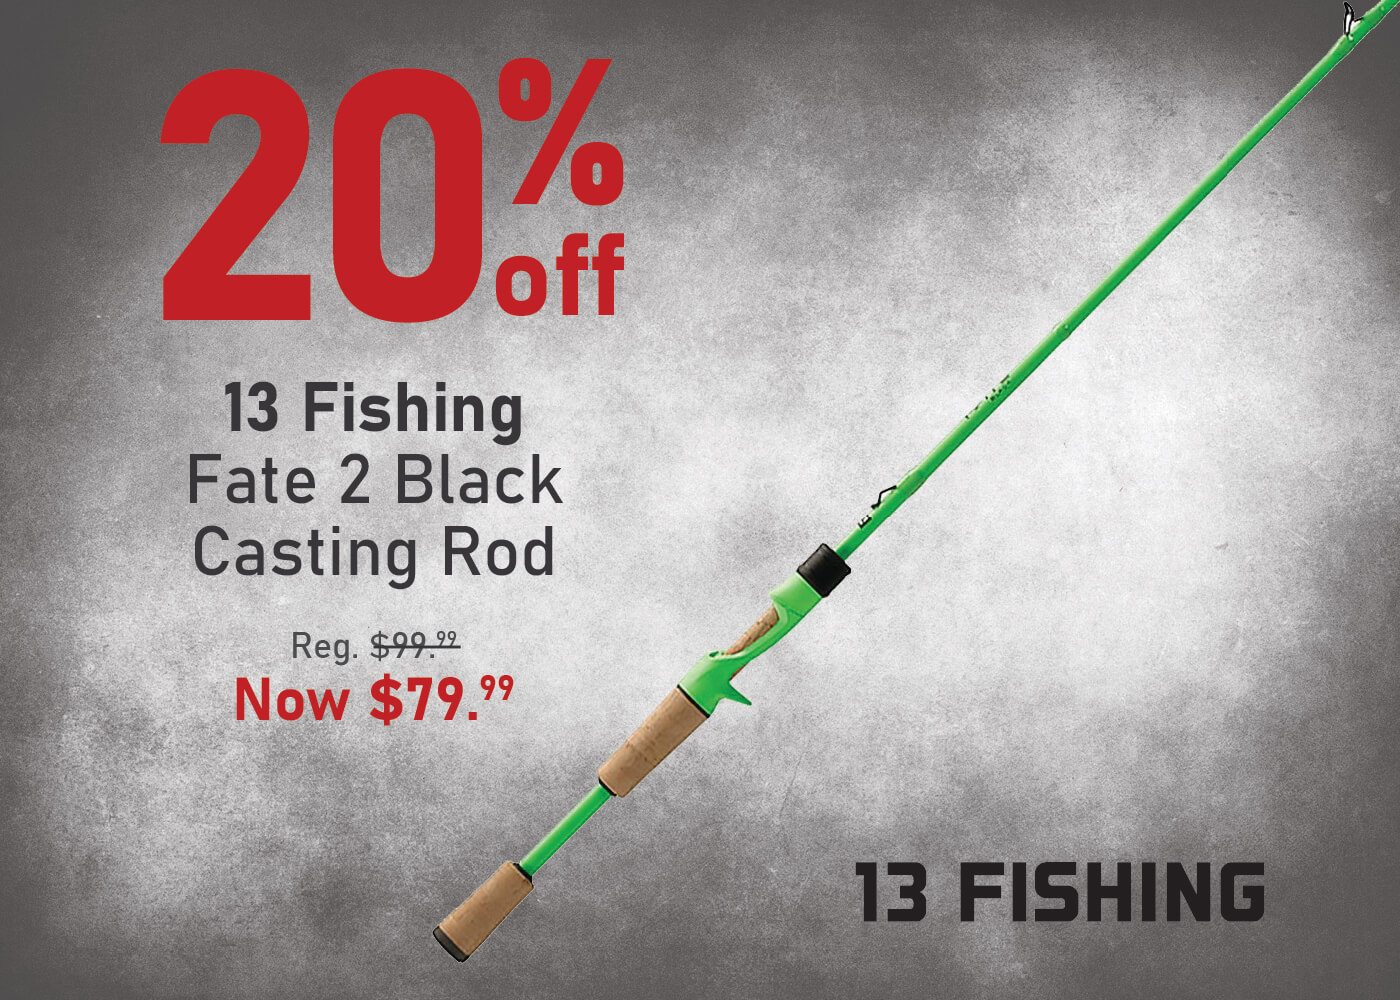 Save 20% on the 13 Fishing Fate 2 Black Casting Rod